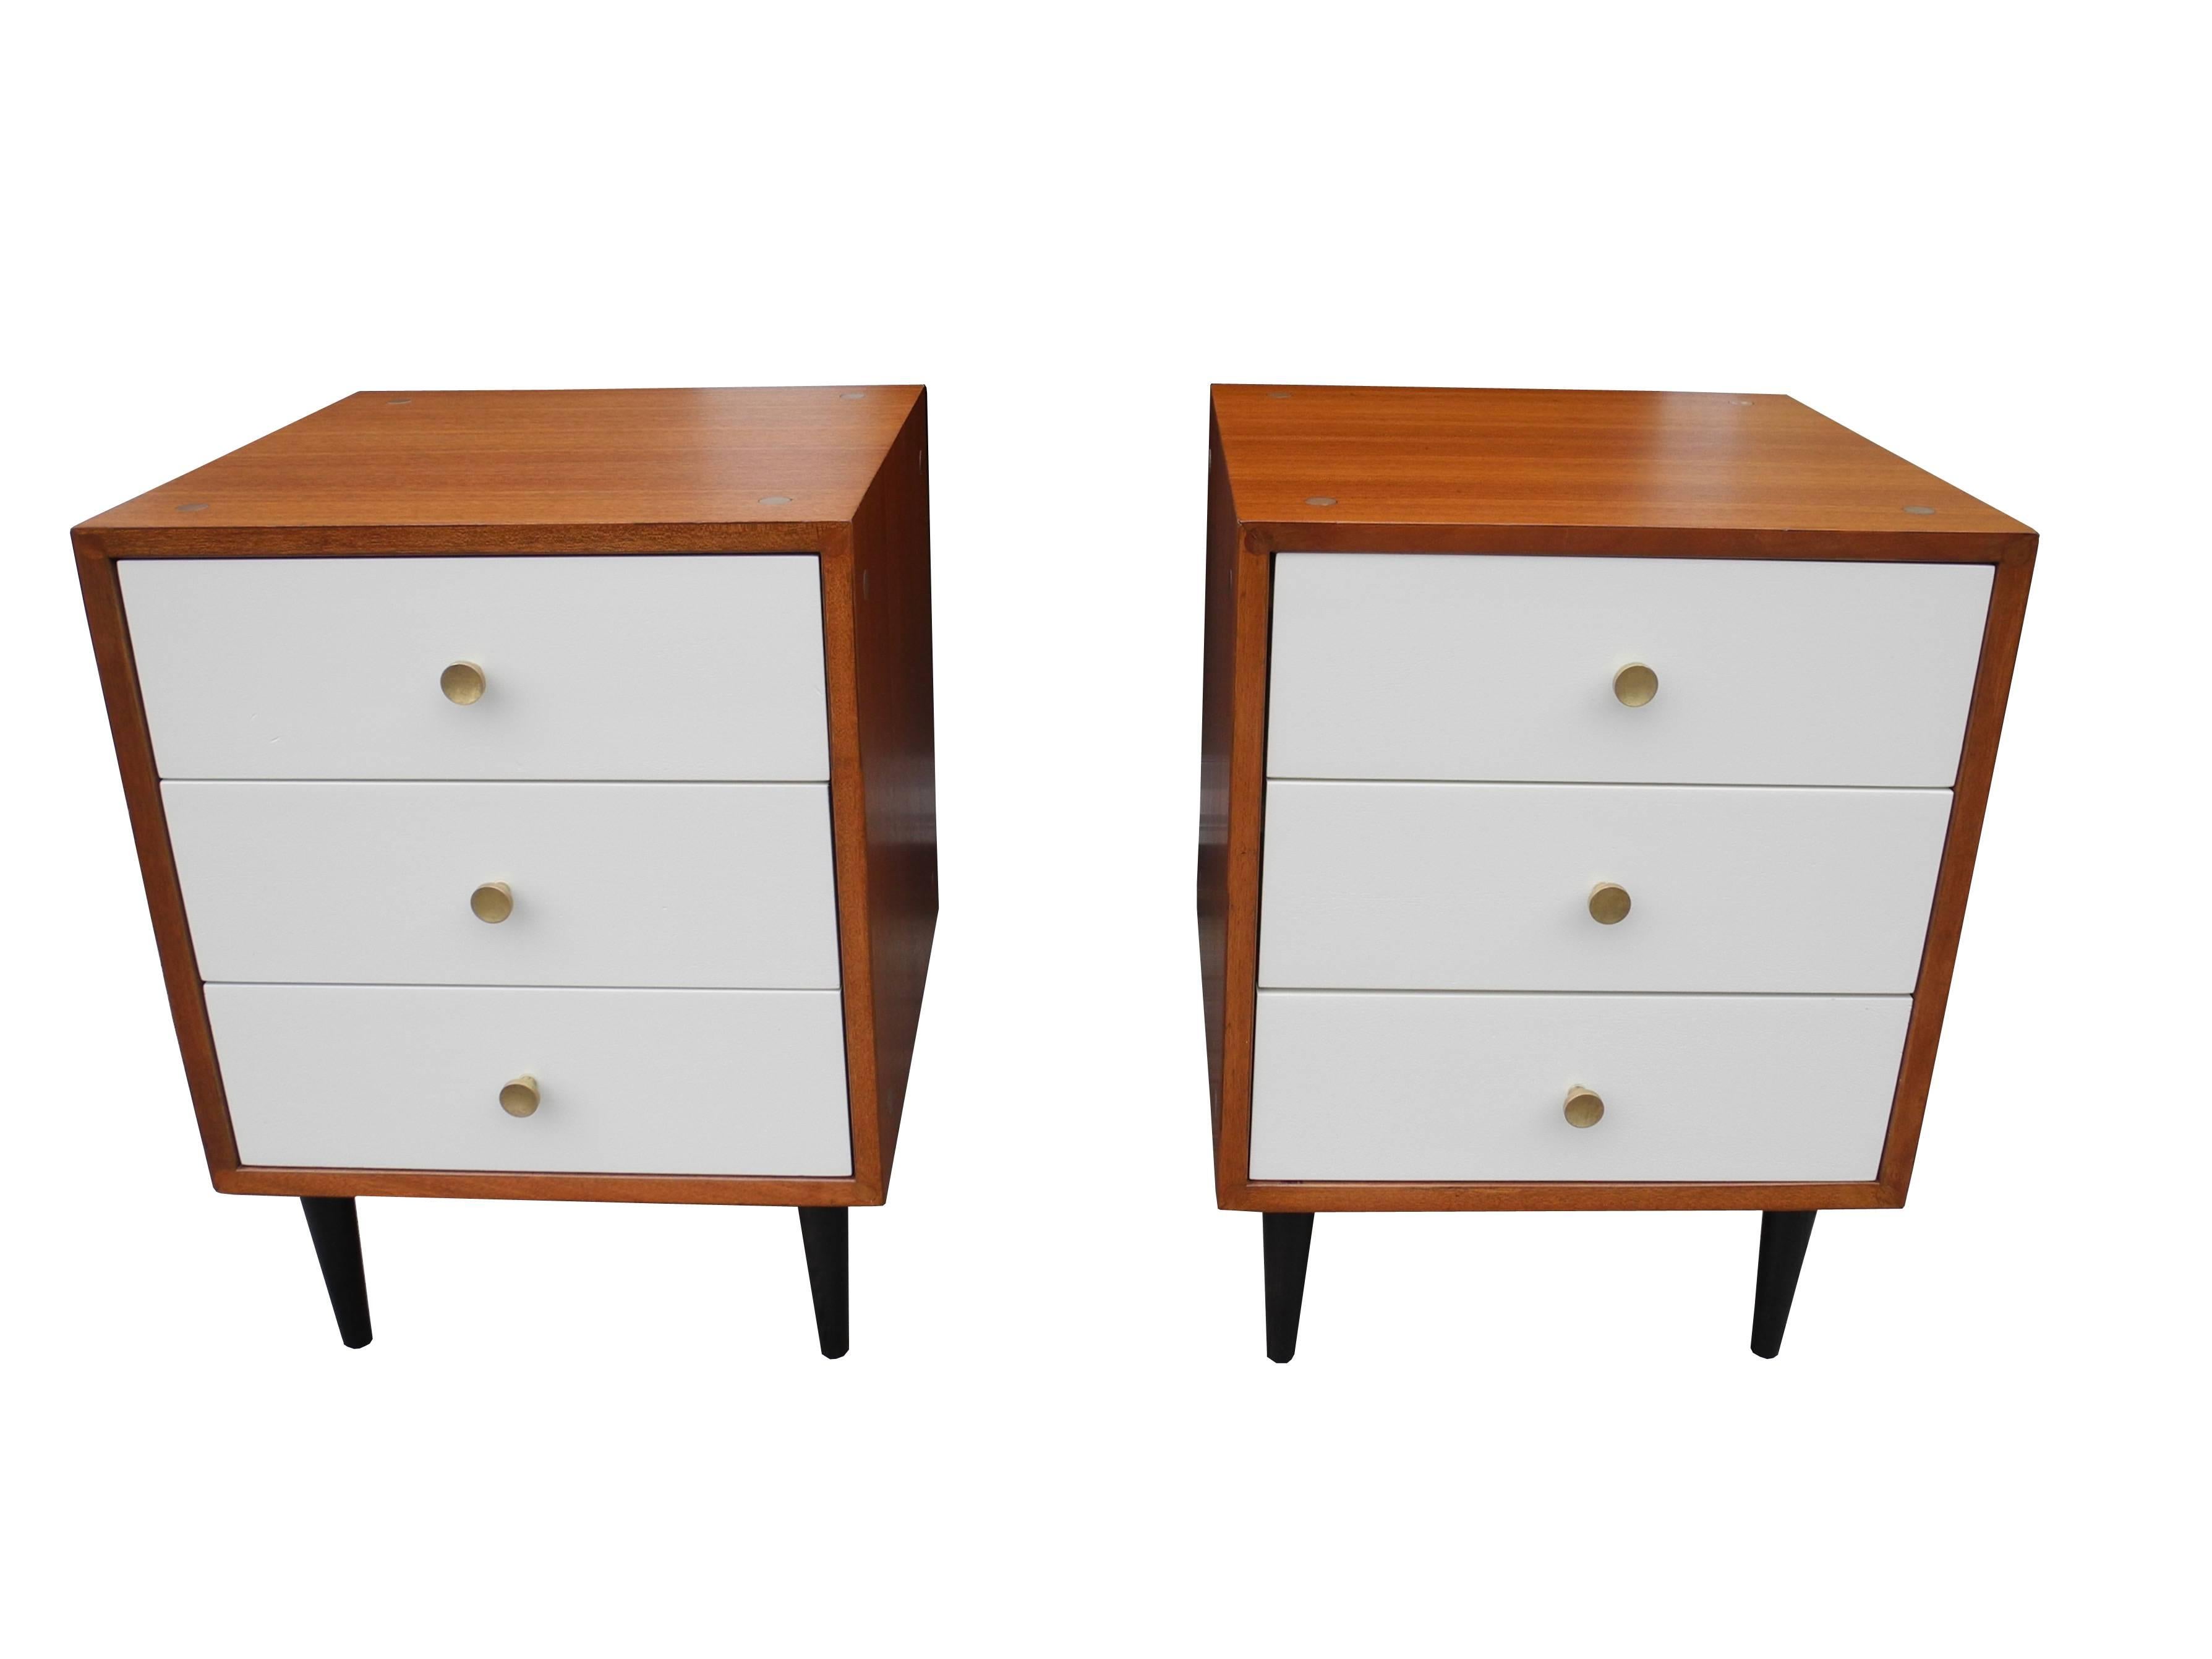 These bedside tables are made of mahogany. The drawer face is painted linen white. Drawer's insides are oak. Solid brass handles for pulls. This was part of an award winning design.